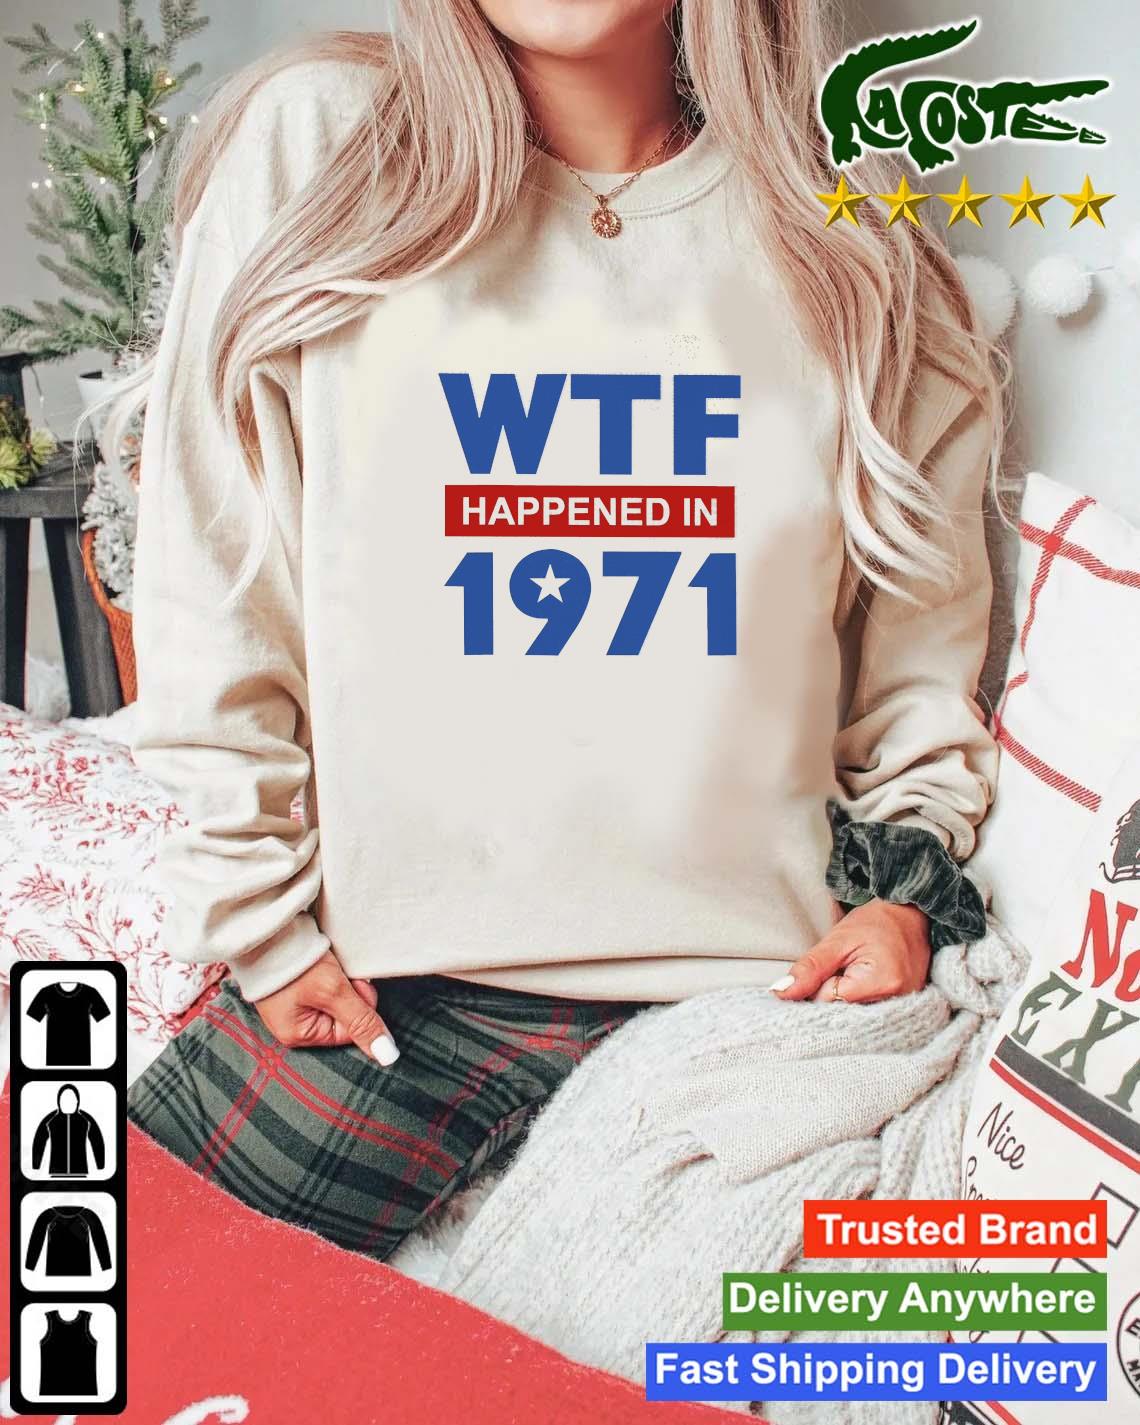 Official Wtf Happened In 1971 Sweats Mockup Sweater